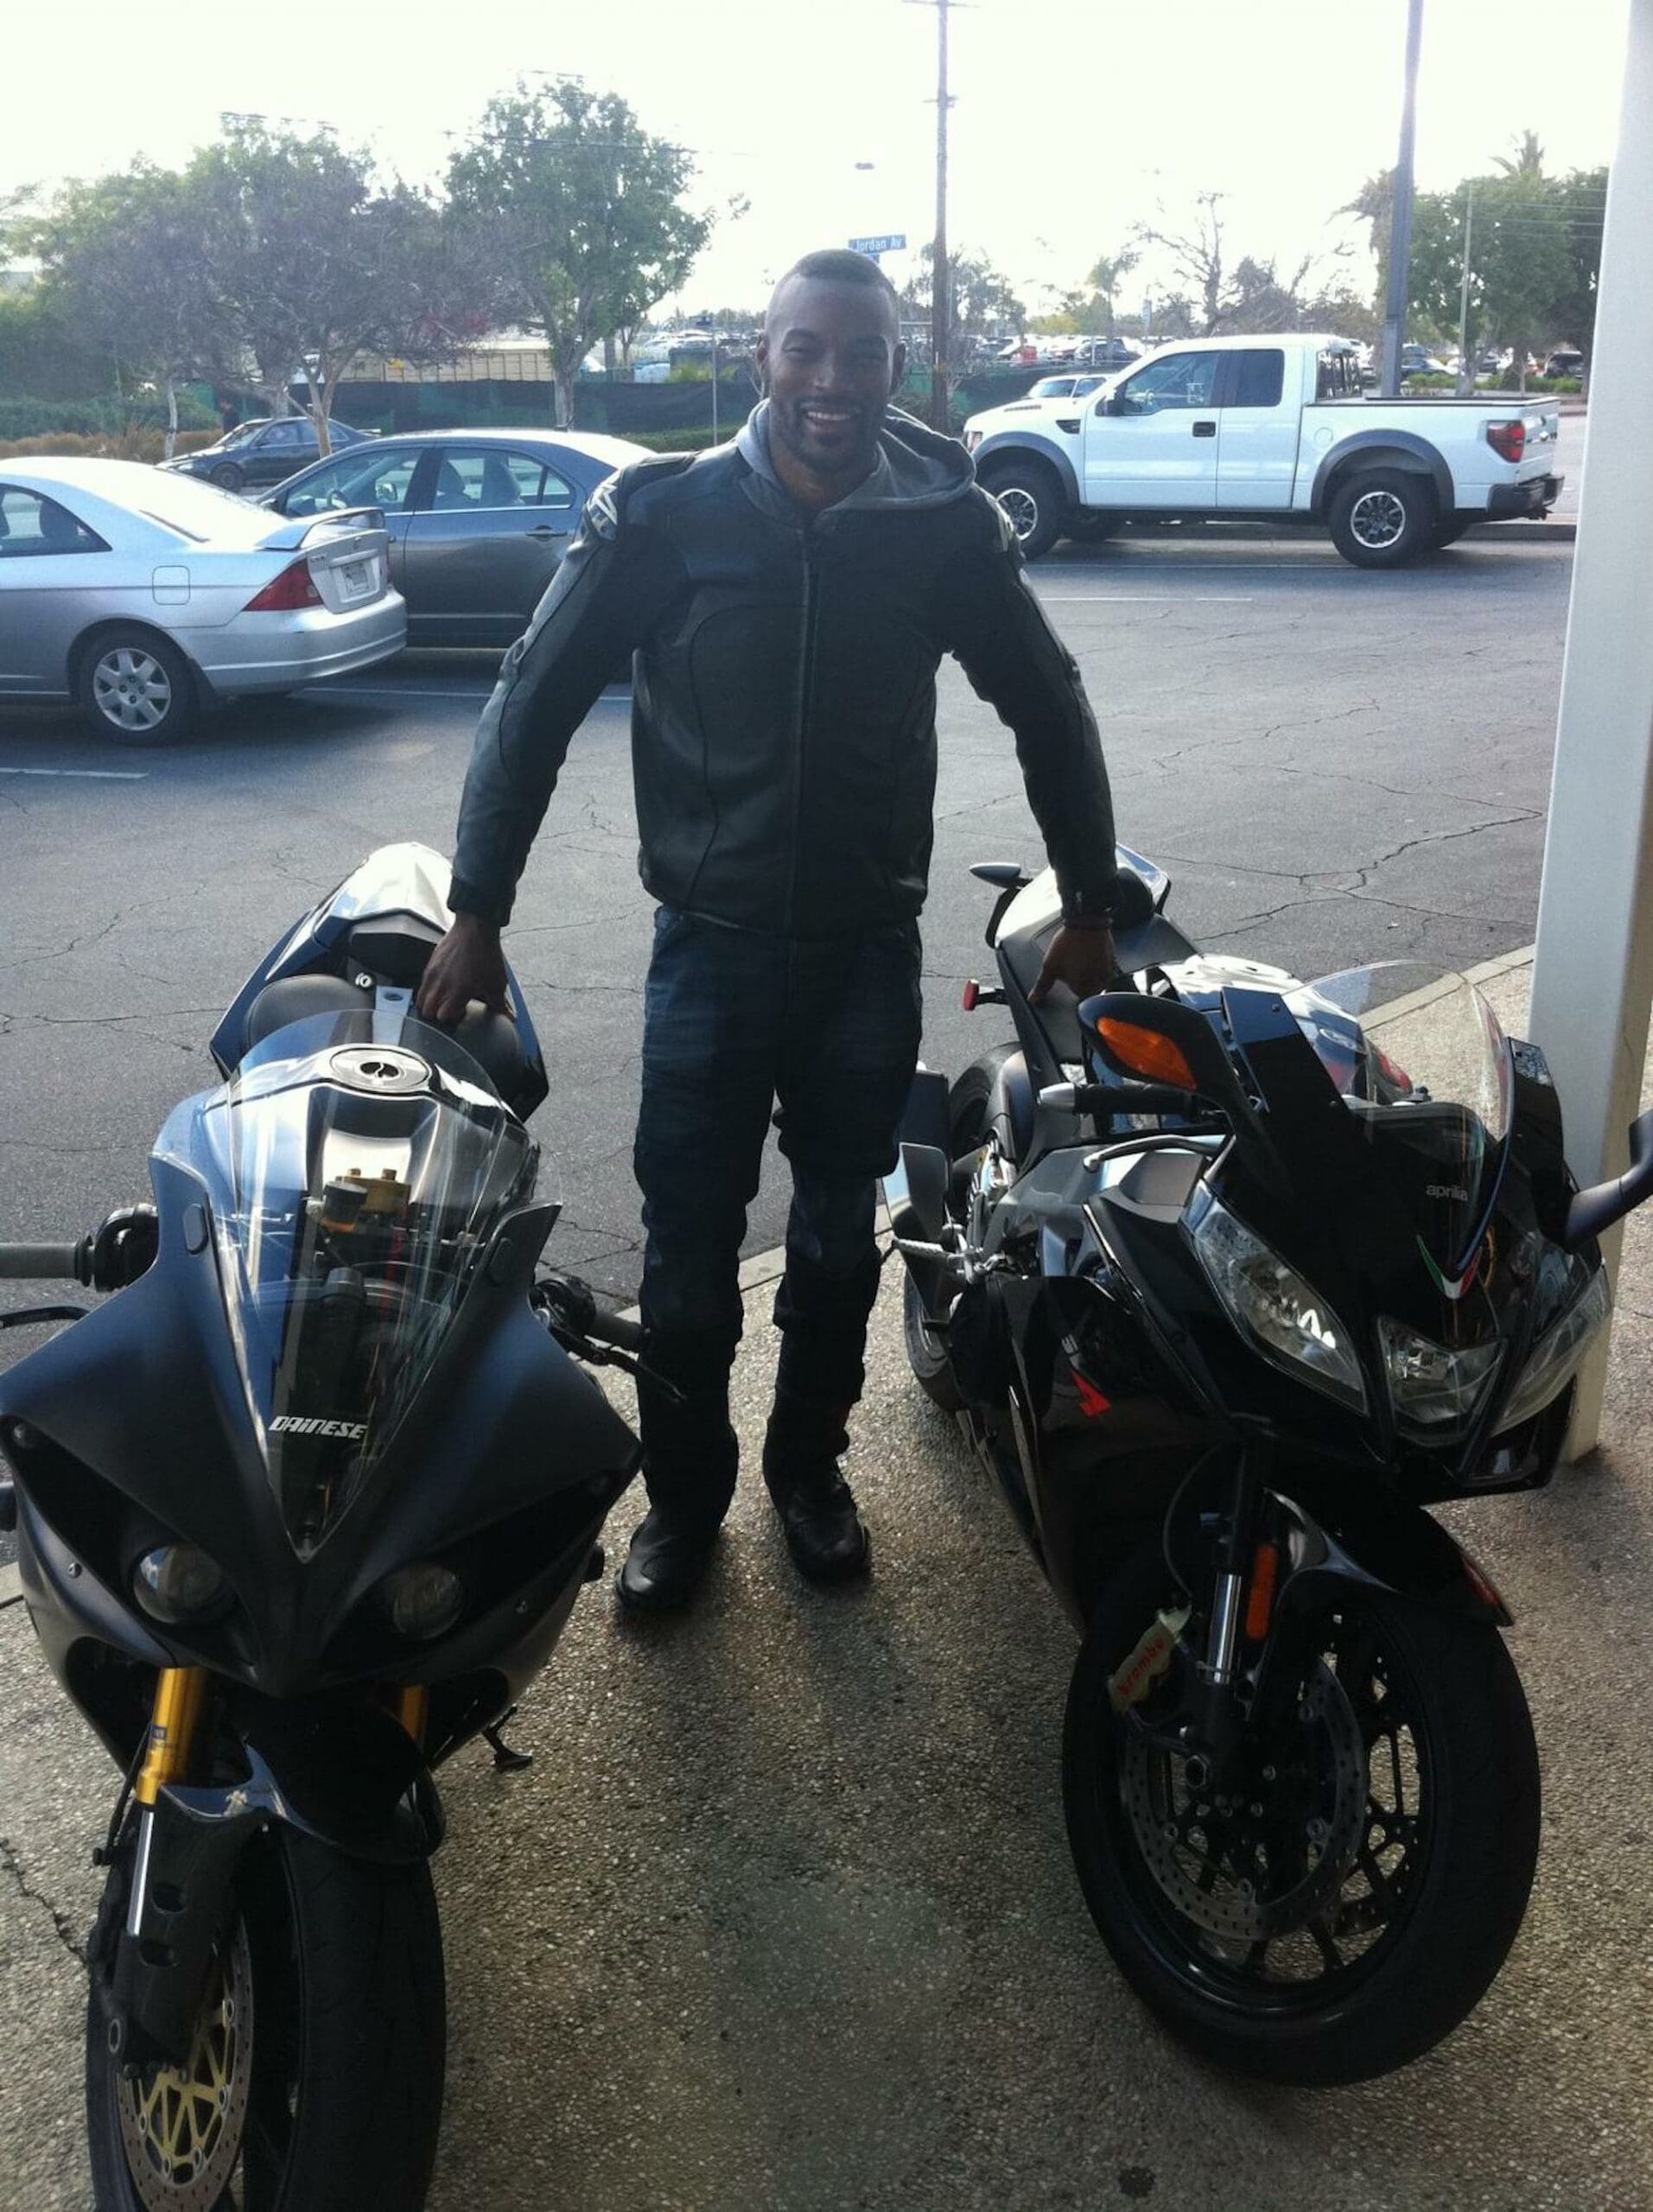 Tyson Beckford with the Aprilia RSV4, which we are told he briefly reviewed. Media sourced from an Aprilia forum.